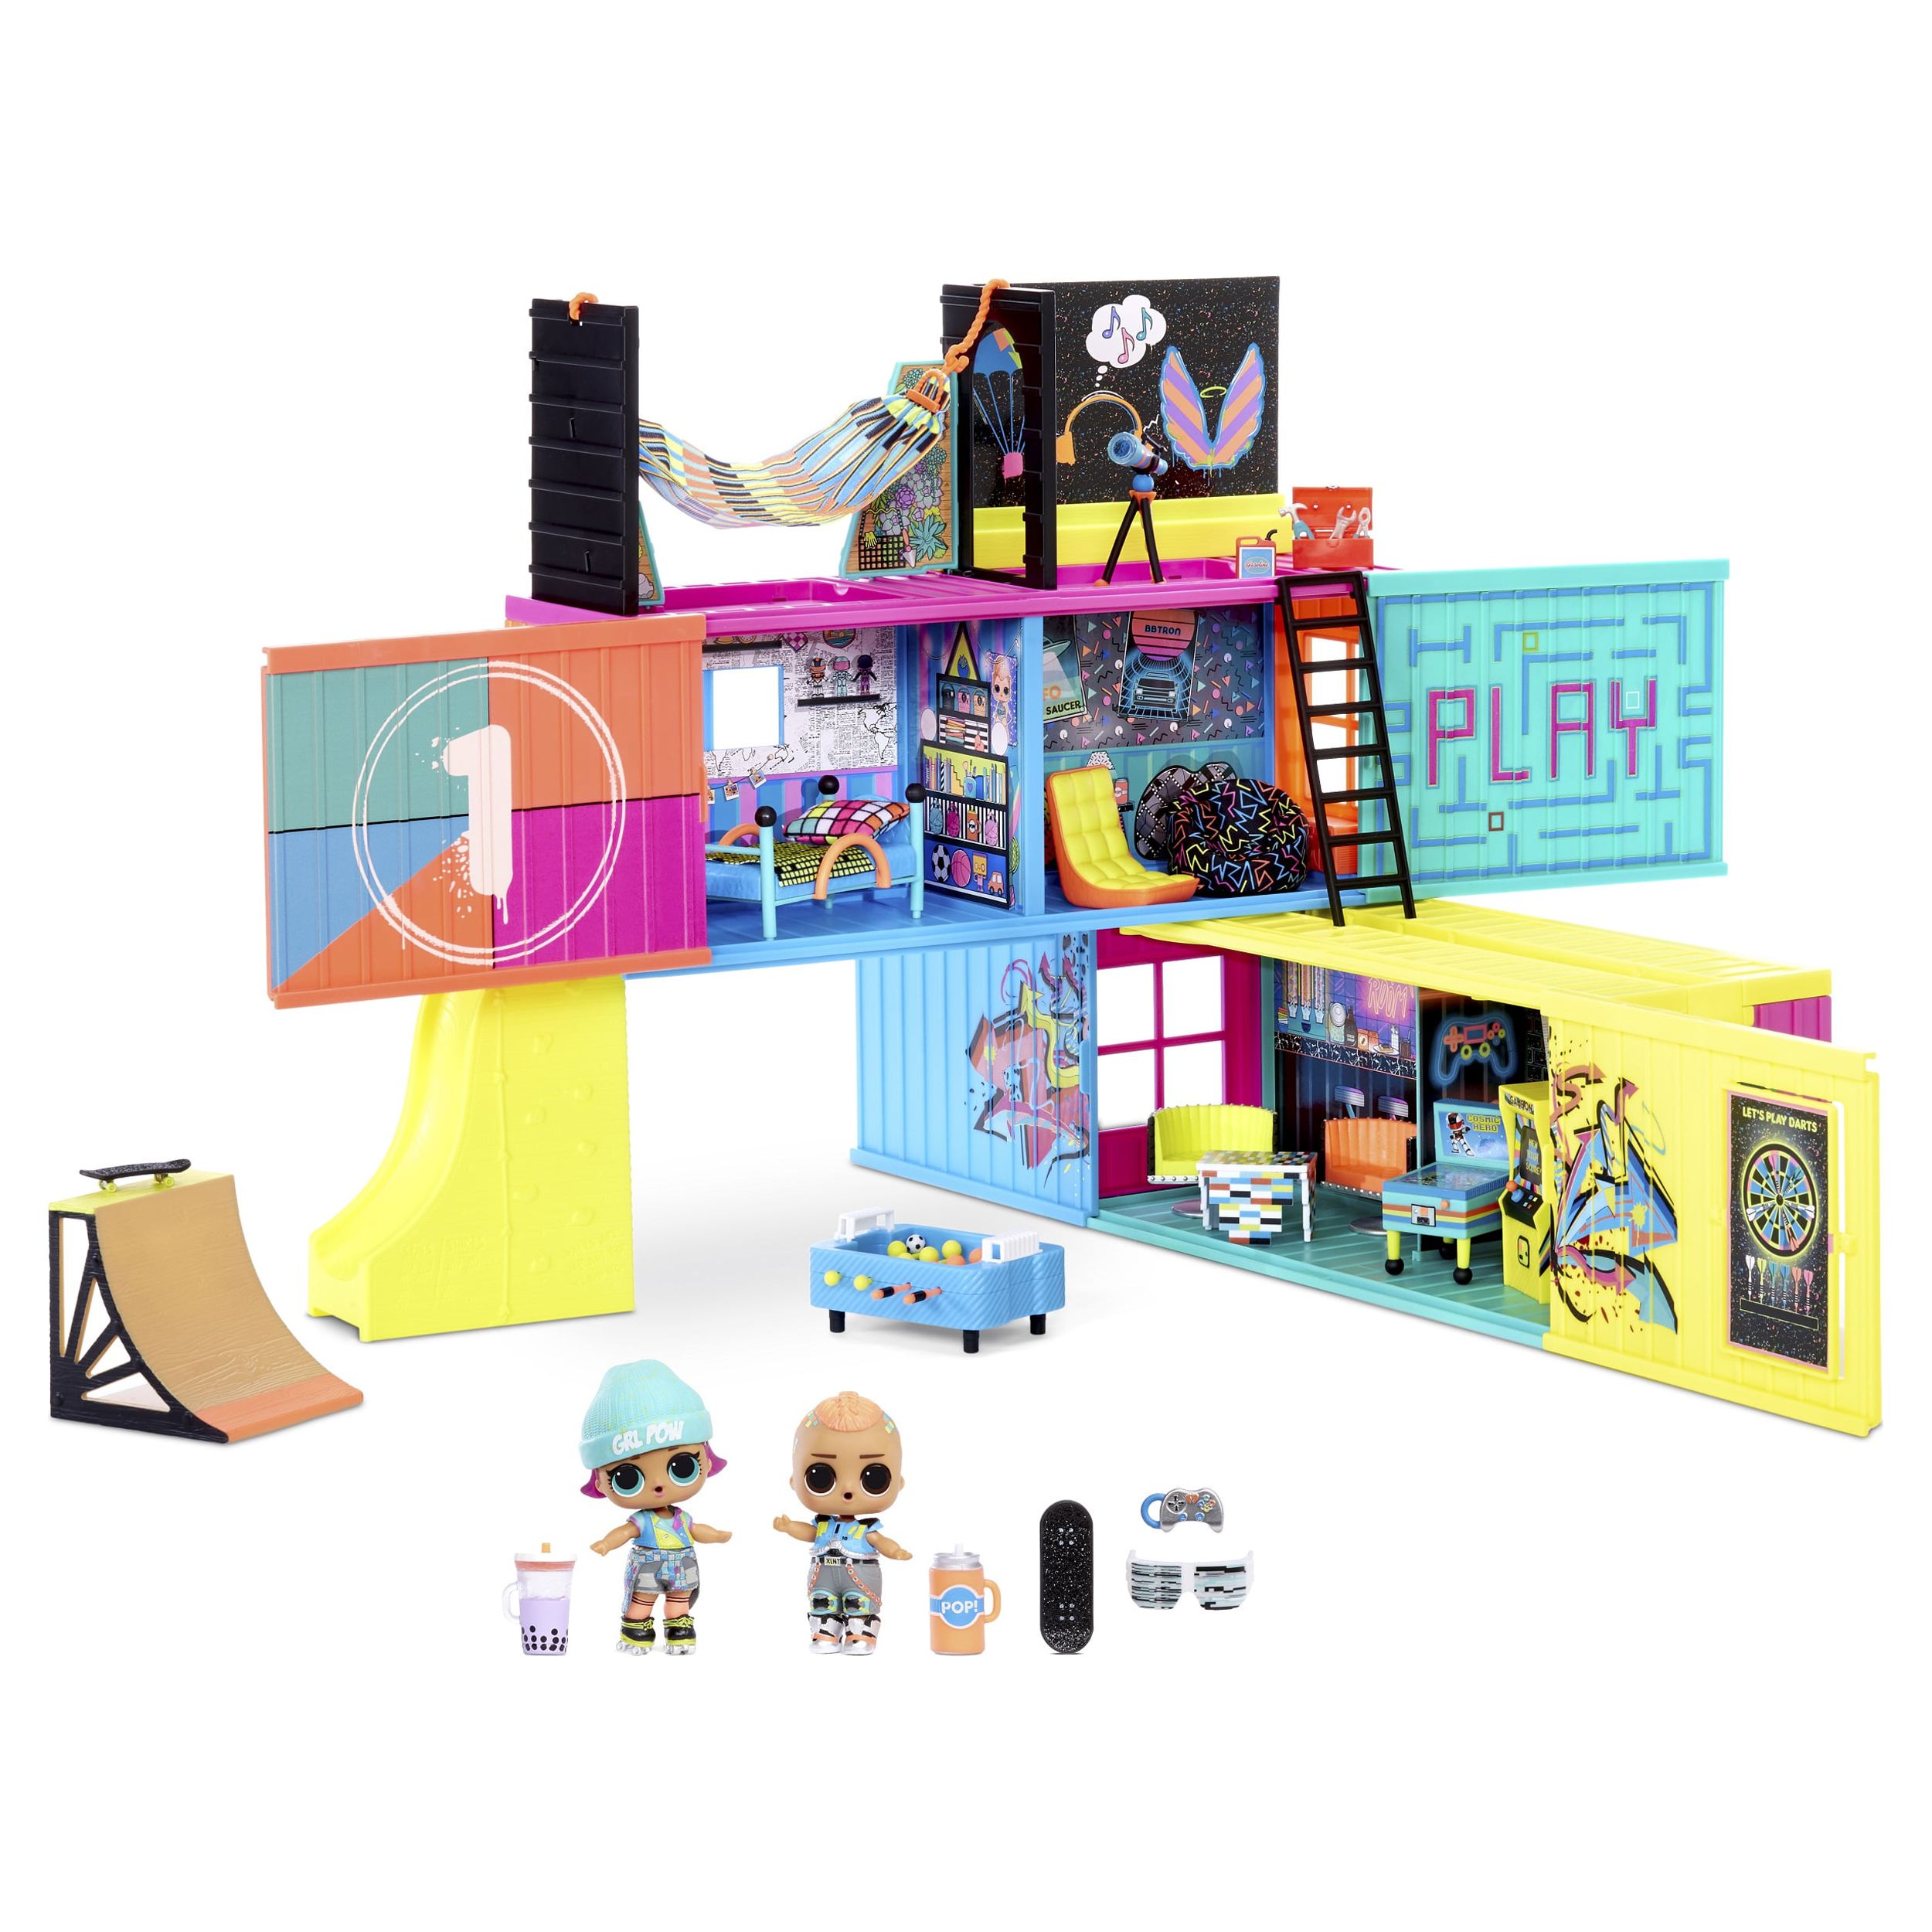 LOL Surprise Clubhouse Playset With 40+ Surprises and 2 Exclusives Dolls, Great Gift for Kids Ages 4 5 6+ - image 1 of 12